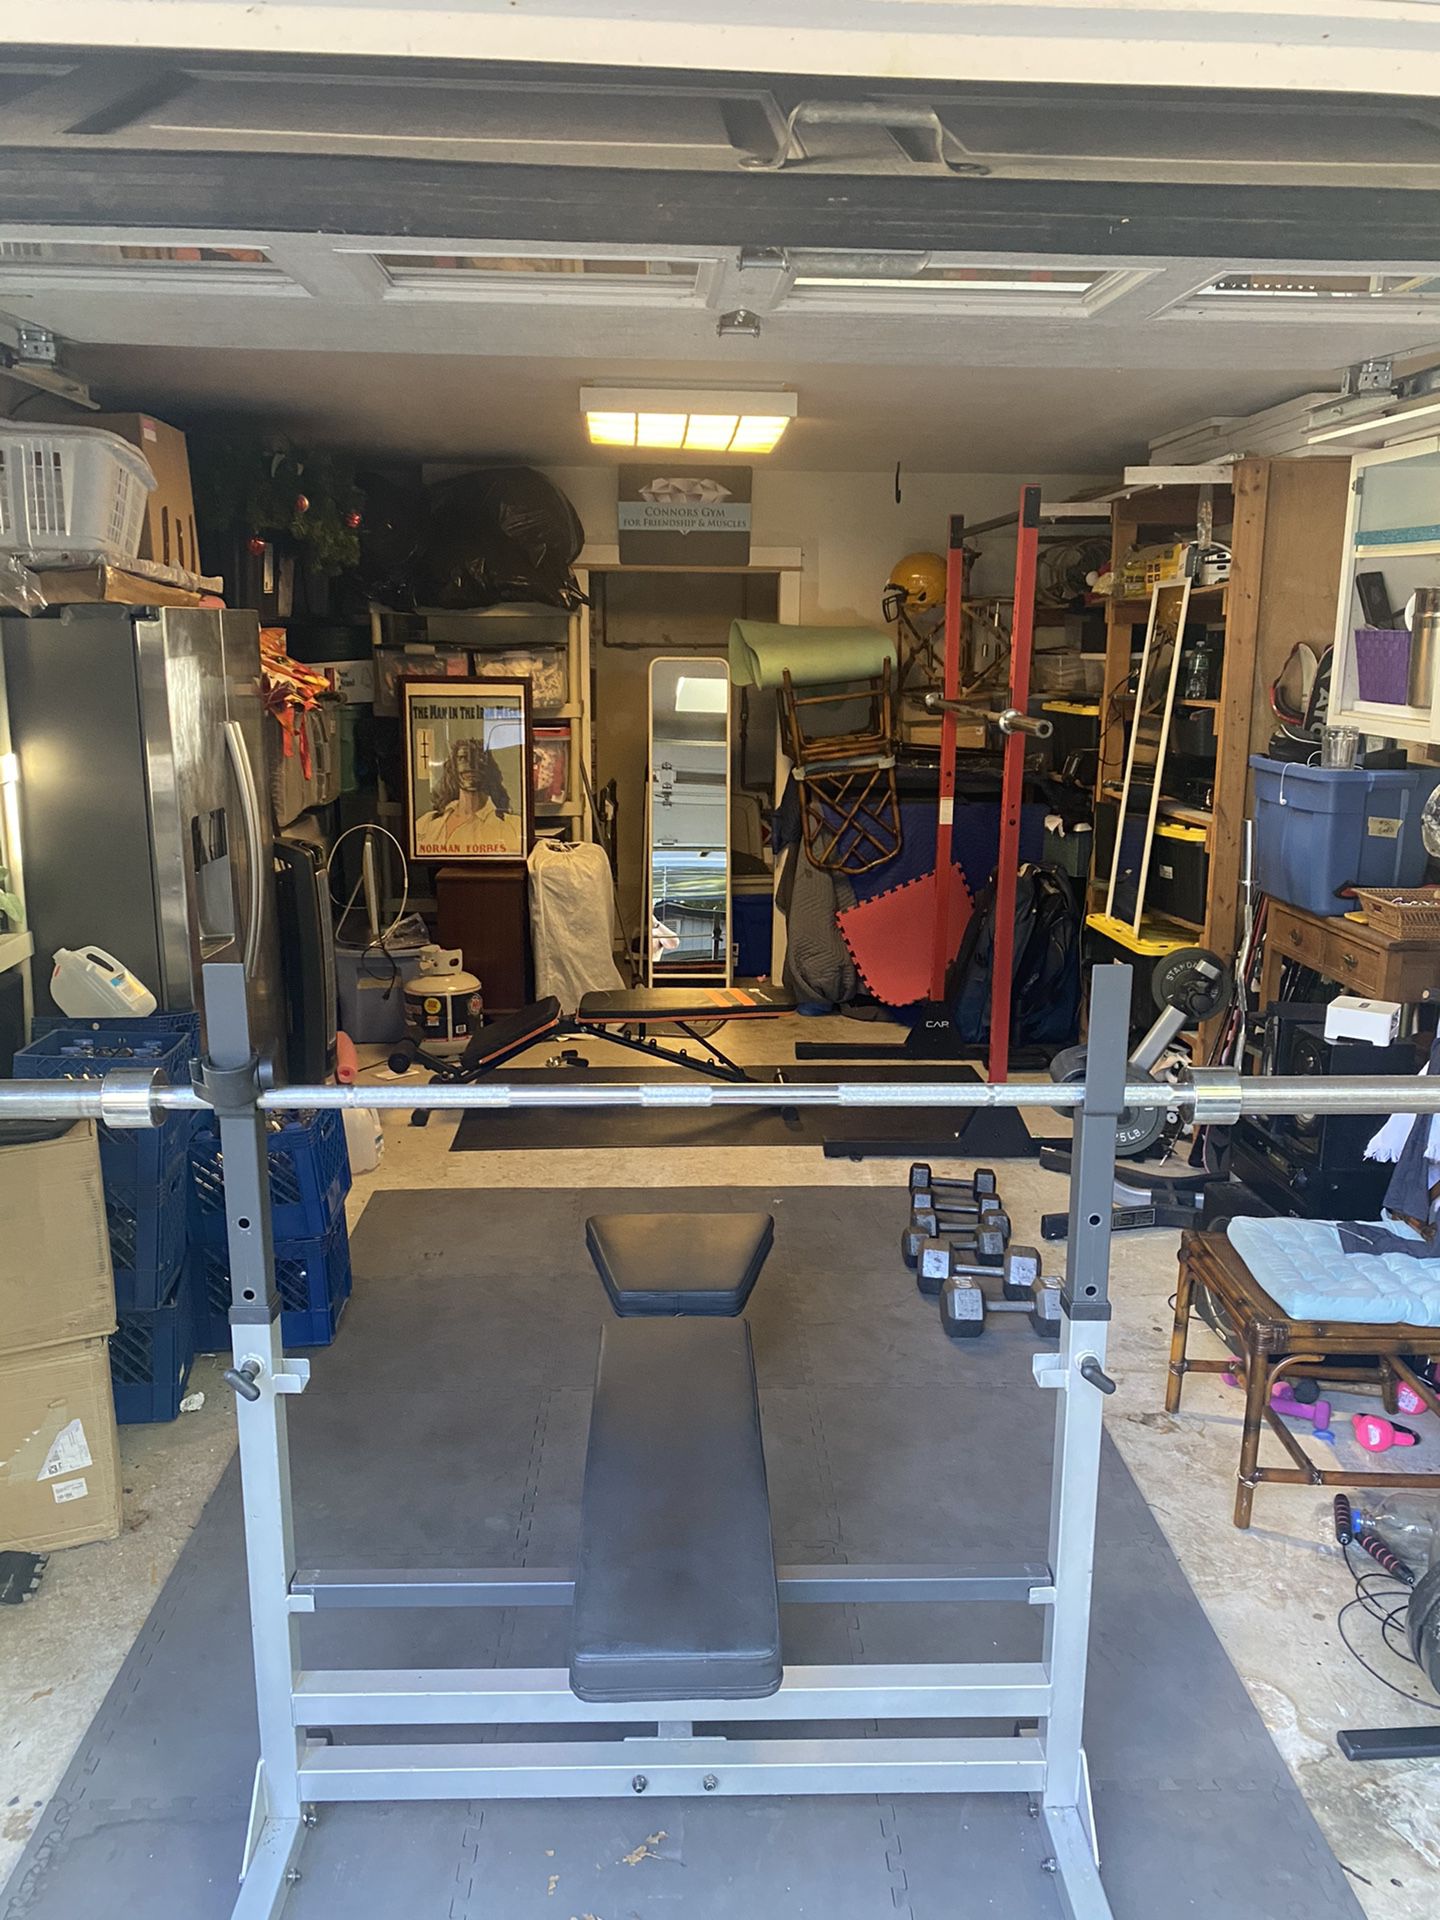 Full home gym set up -prices in description